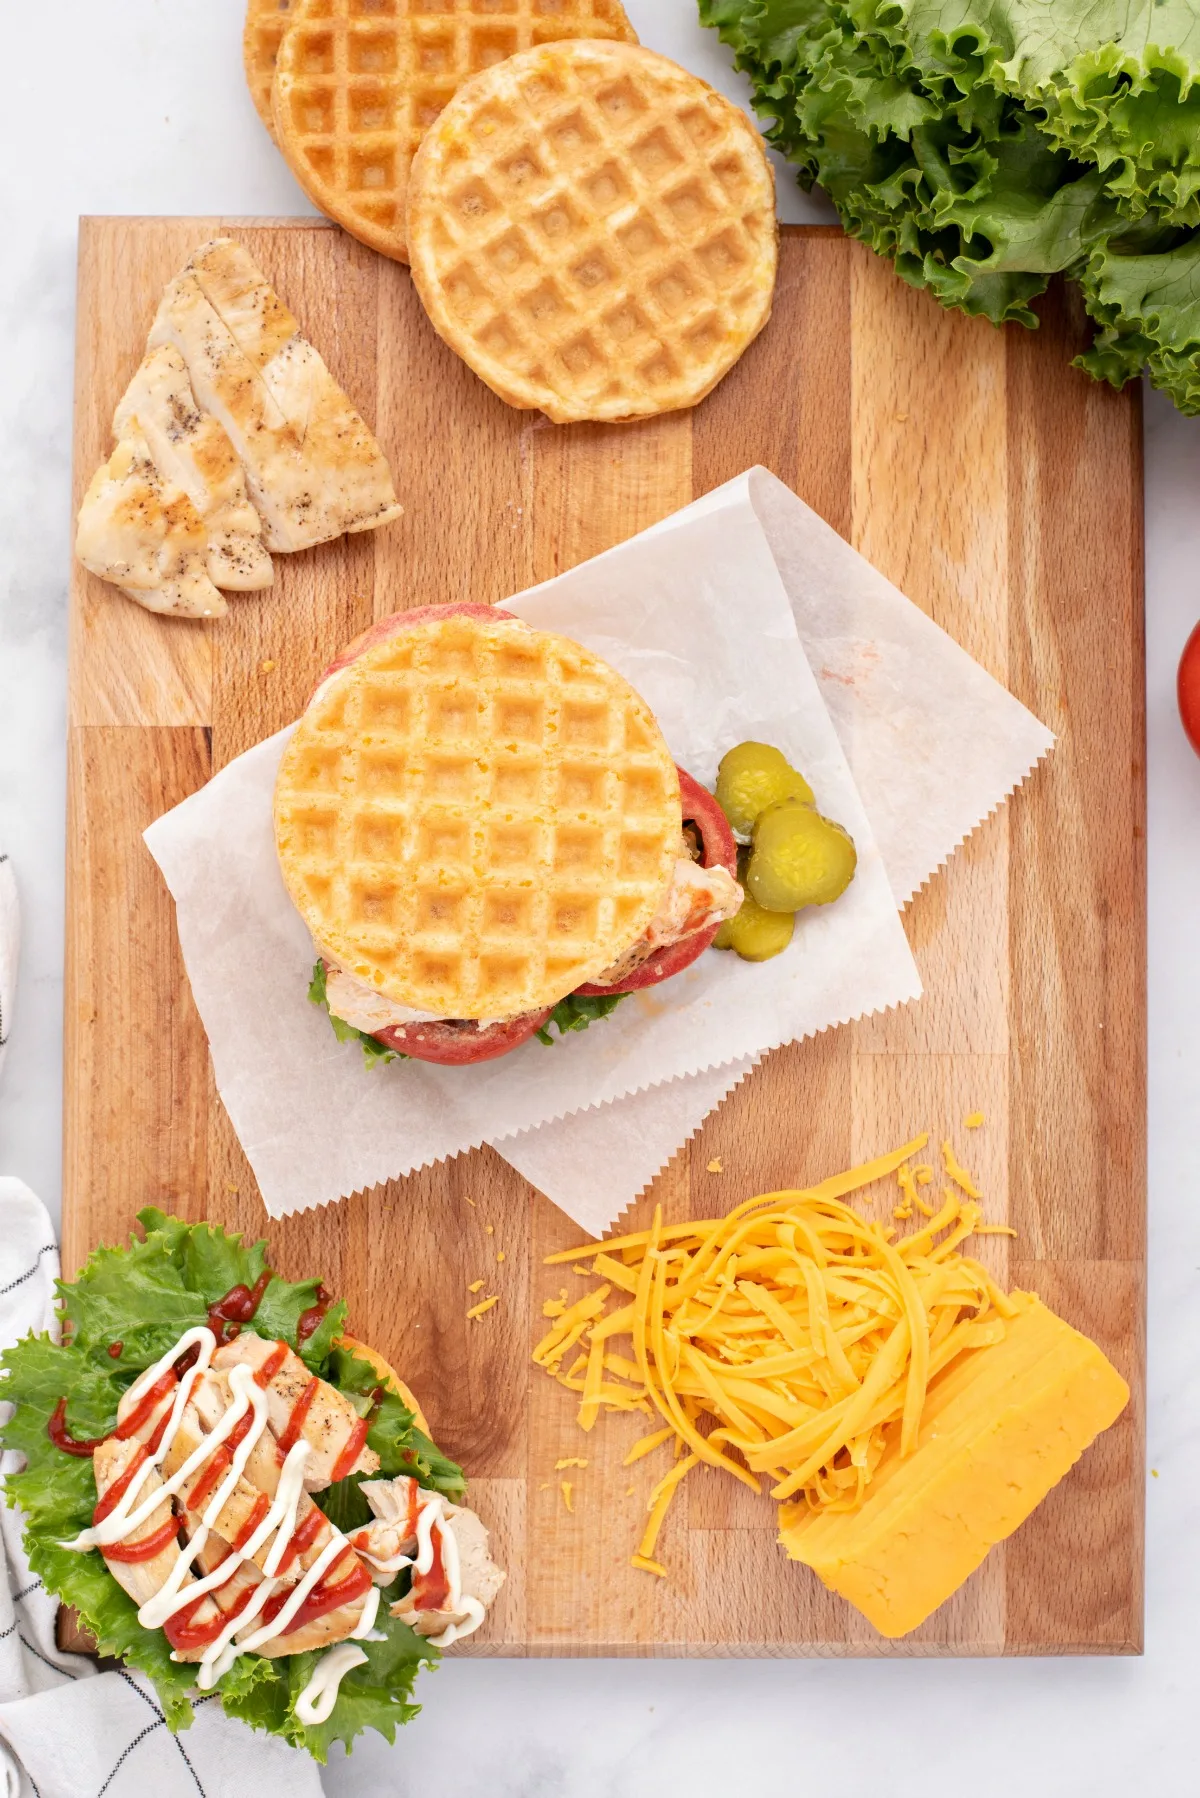 Chaffles being used as a bun for a chicken sandwich.